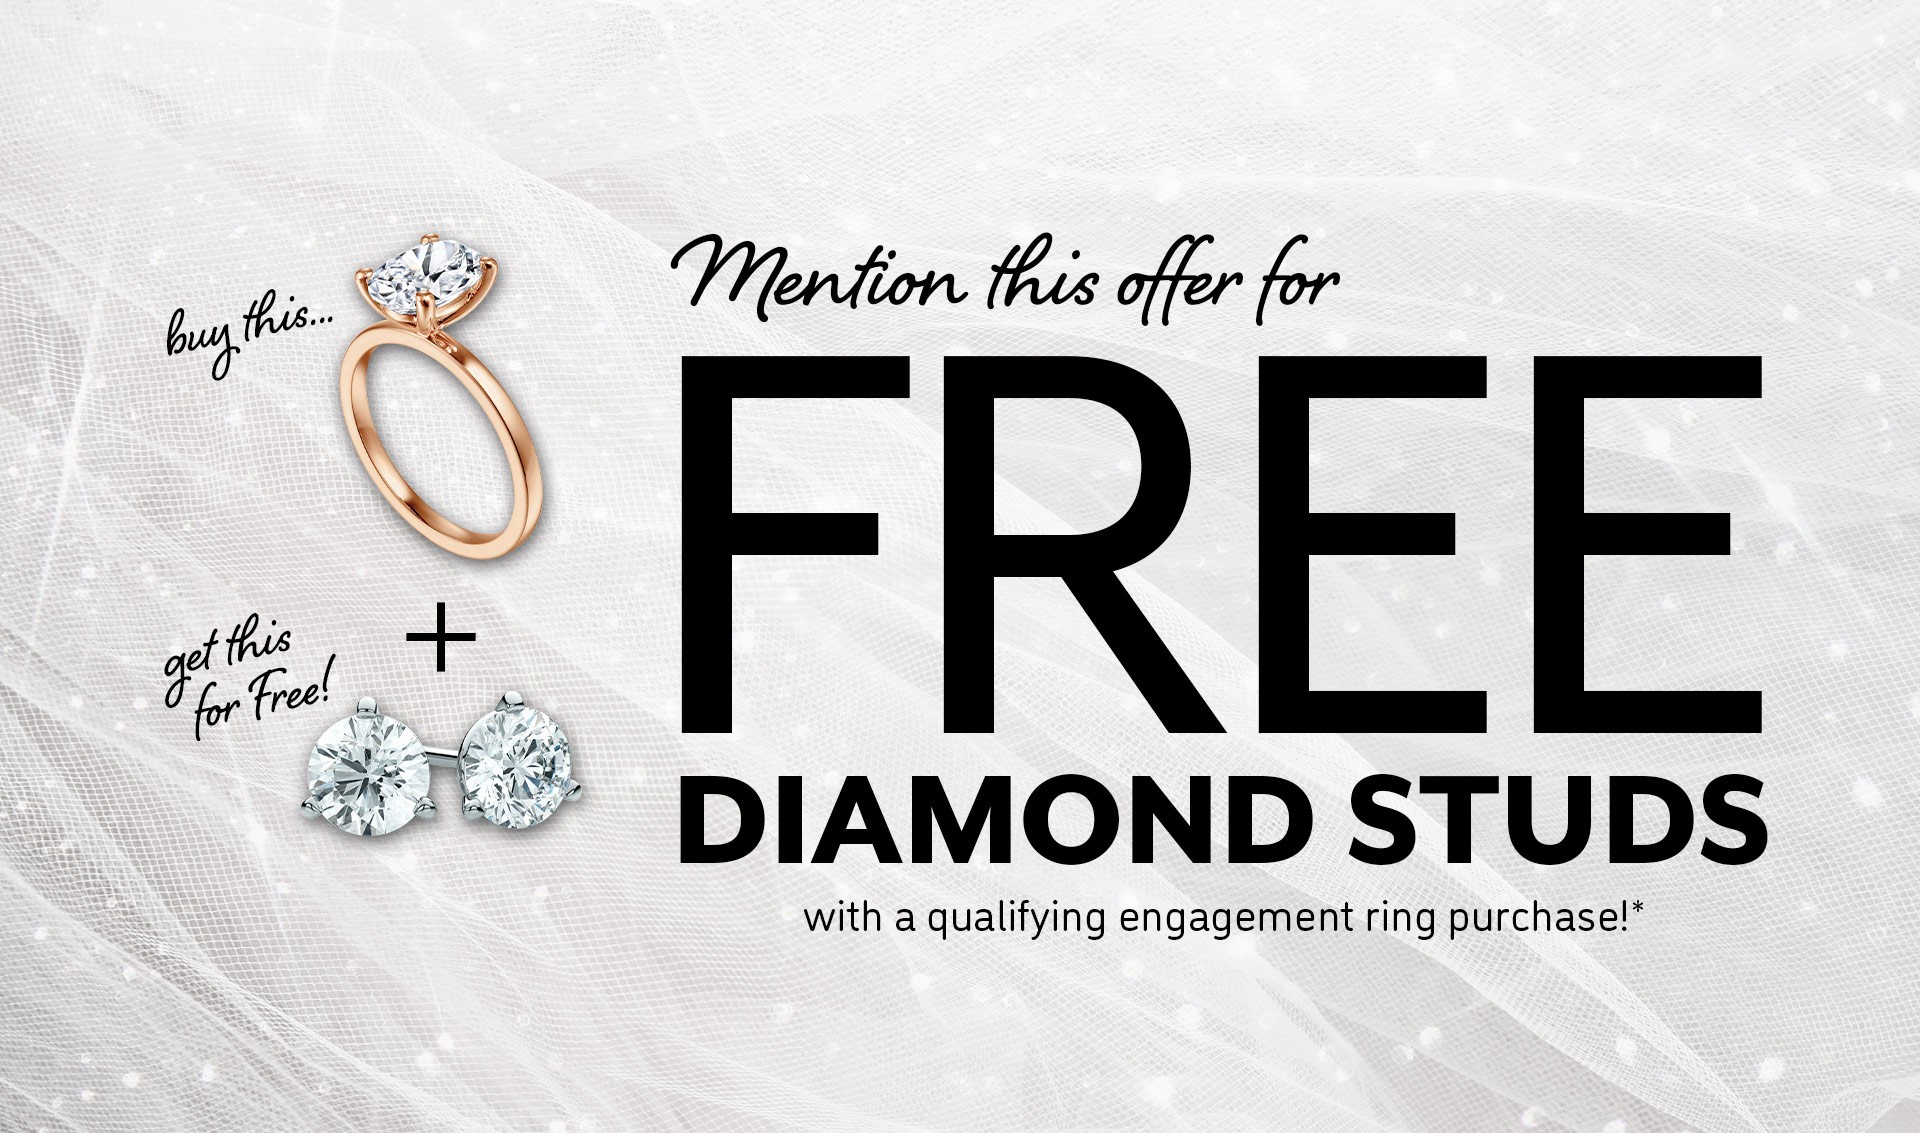 Free Diamond Studs with qualifying purchase